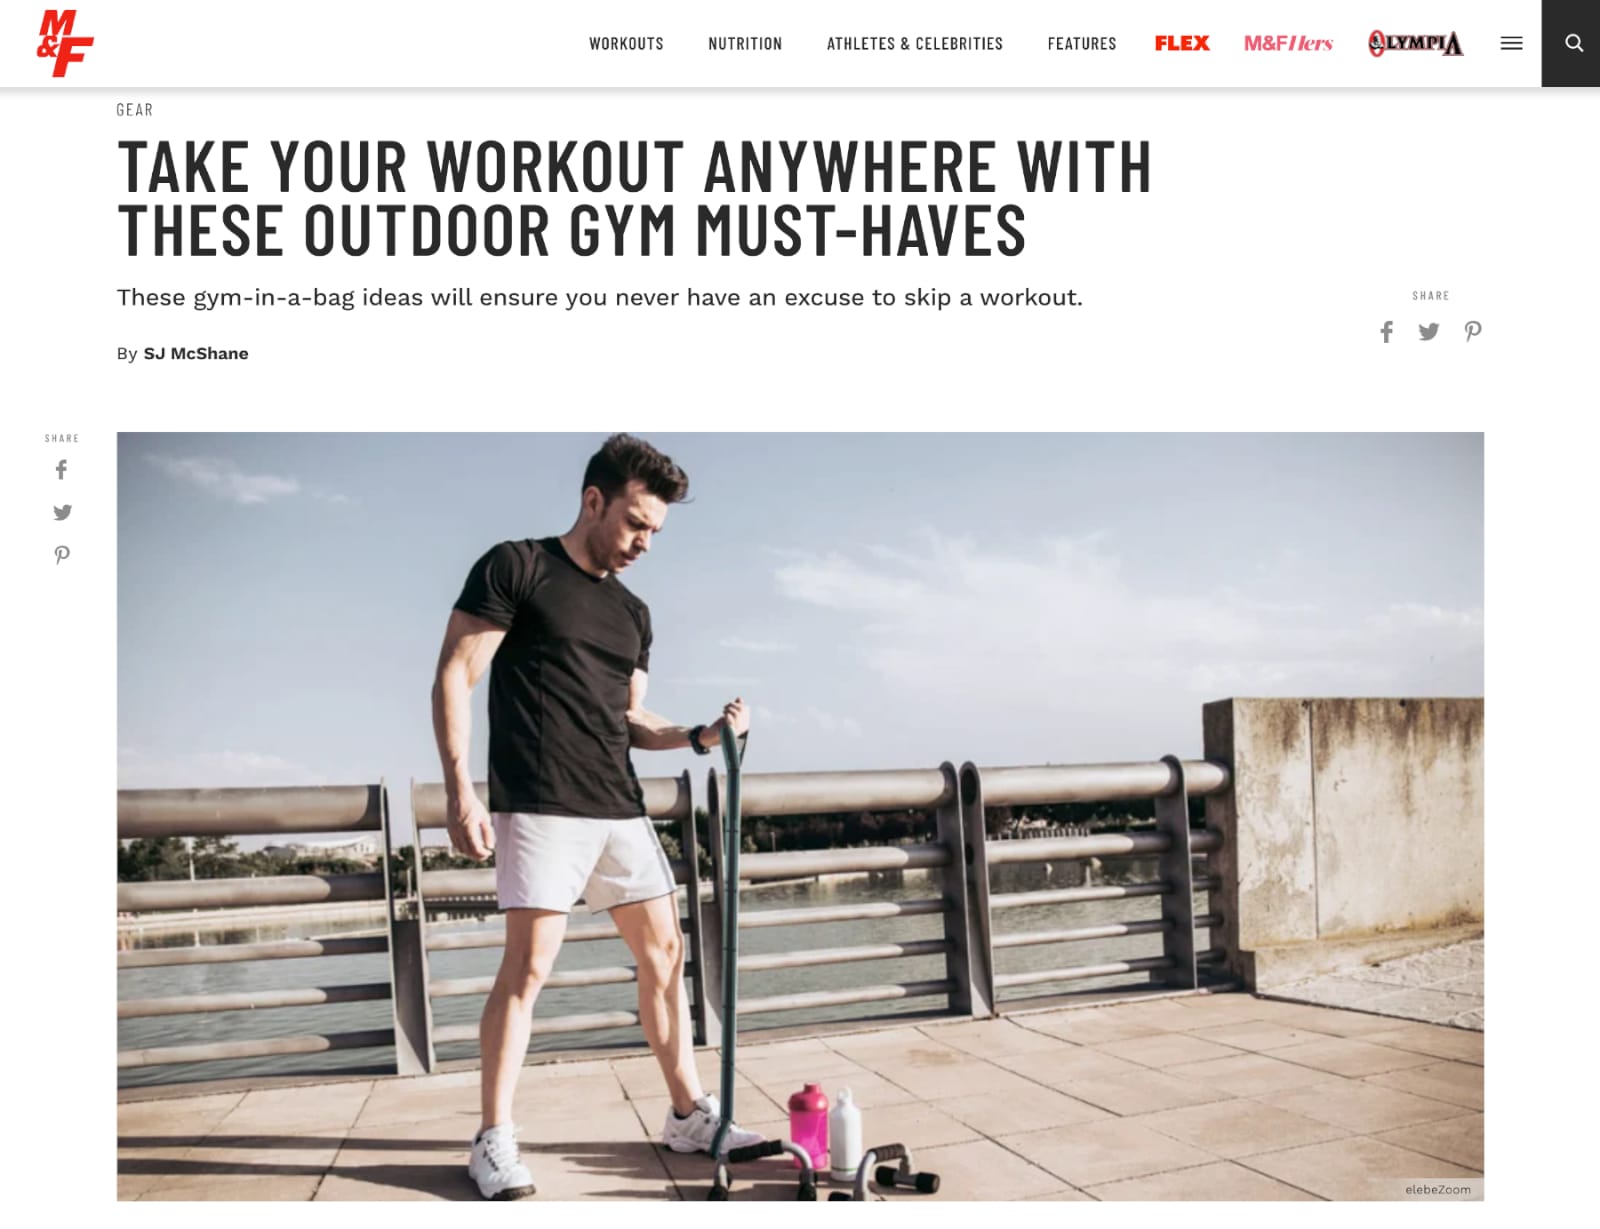 Muscle & Fitness Article: Take Your Workout Anywhere With These Outdoor Gym Must-Haves